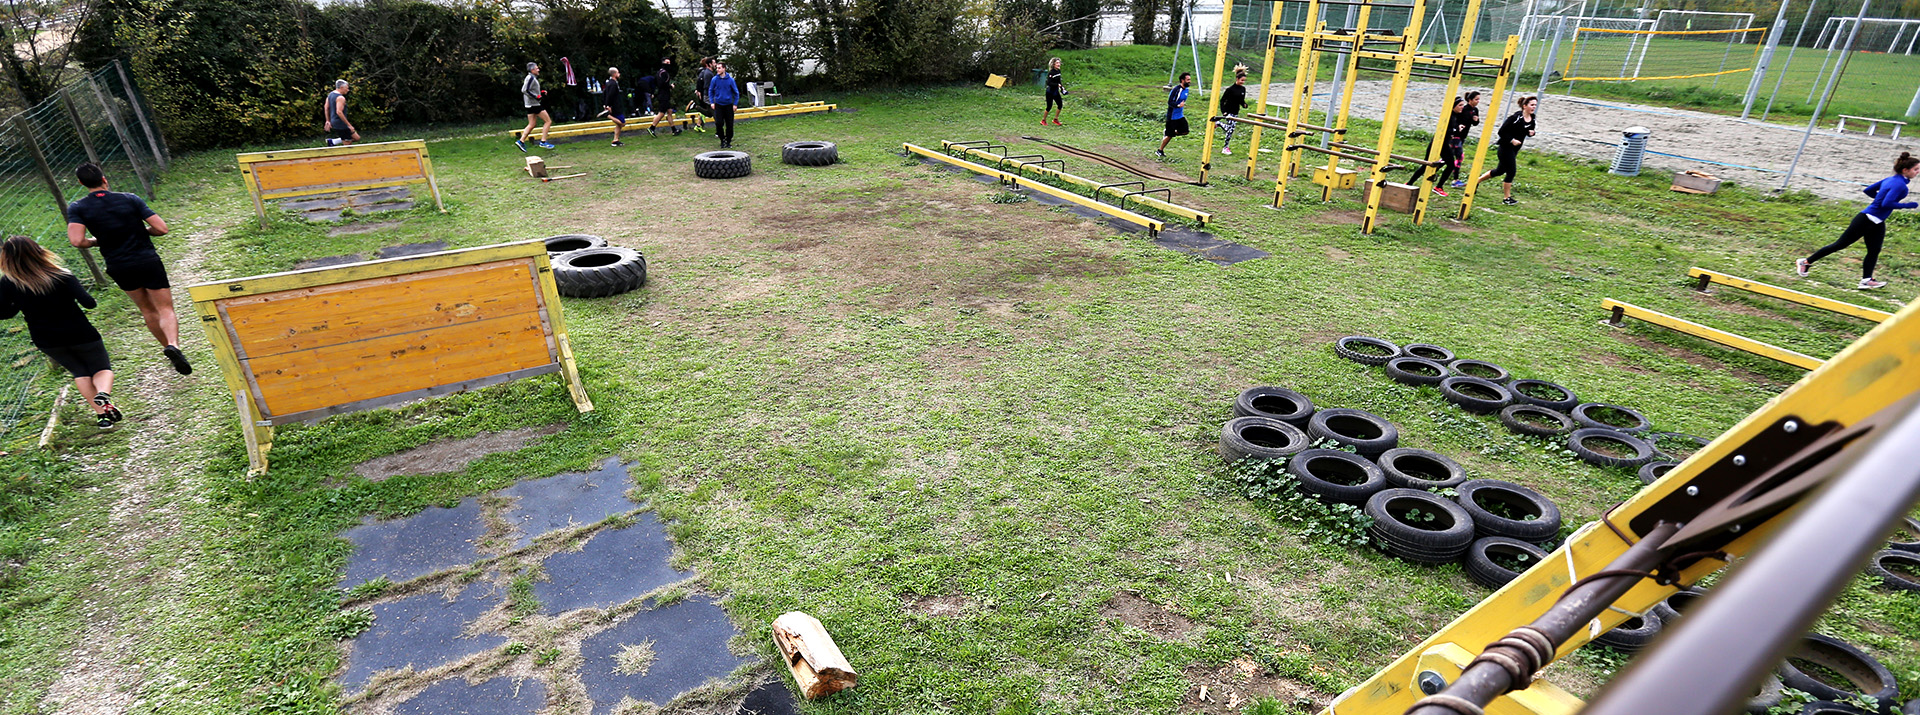 Palestra firenze outdoor fitness personal trainer